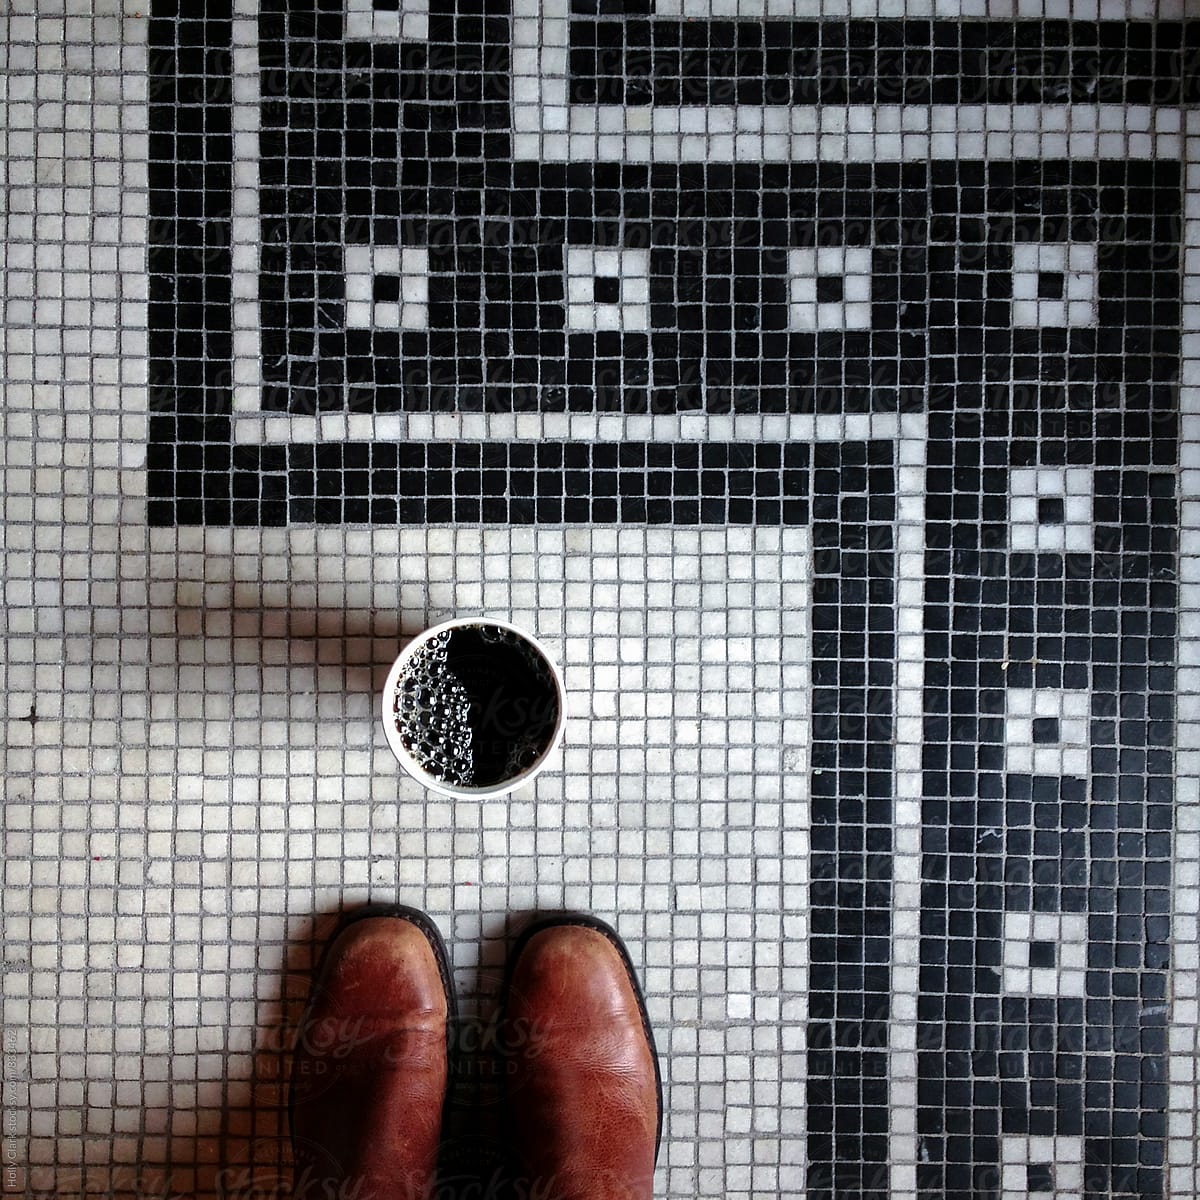 Toes of brown boots in front of coffee cup on a tiled floor at a cafe